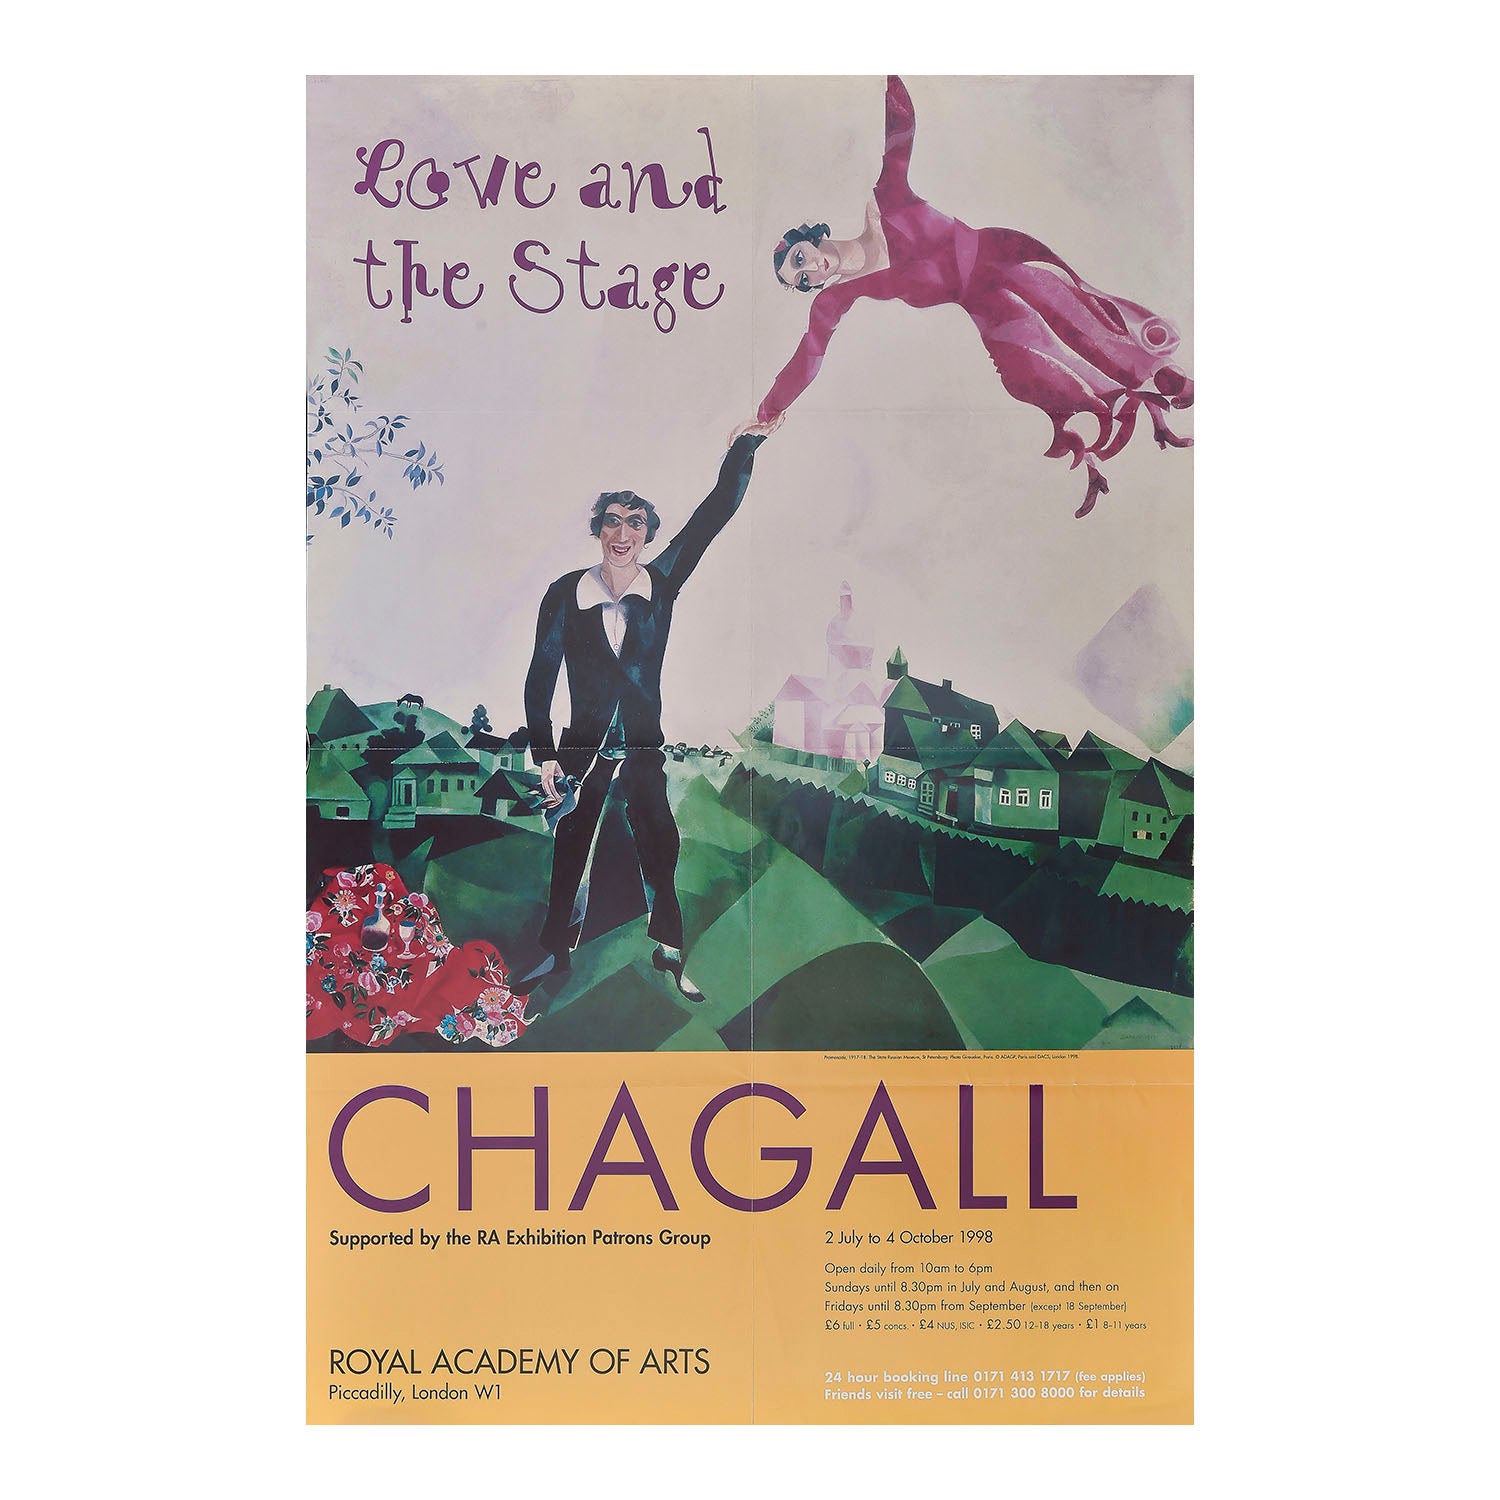 Original art exhibition poster, Chagall. Love and the Stage, held at the Royal Academy of Arts, 1988. The design features a detail from Promenade (1917-18) by Marc Chagall